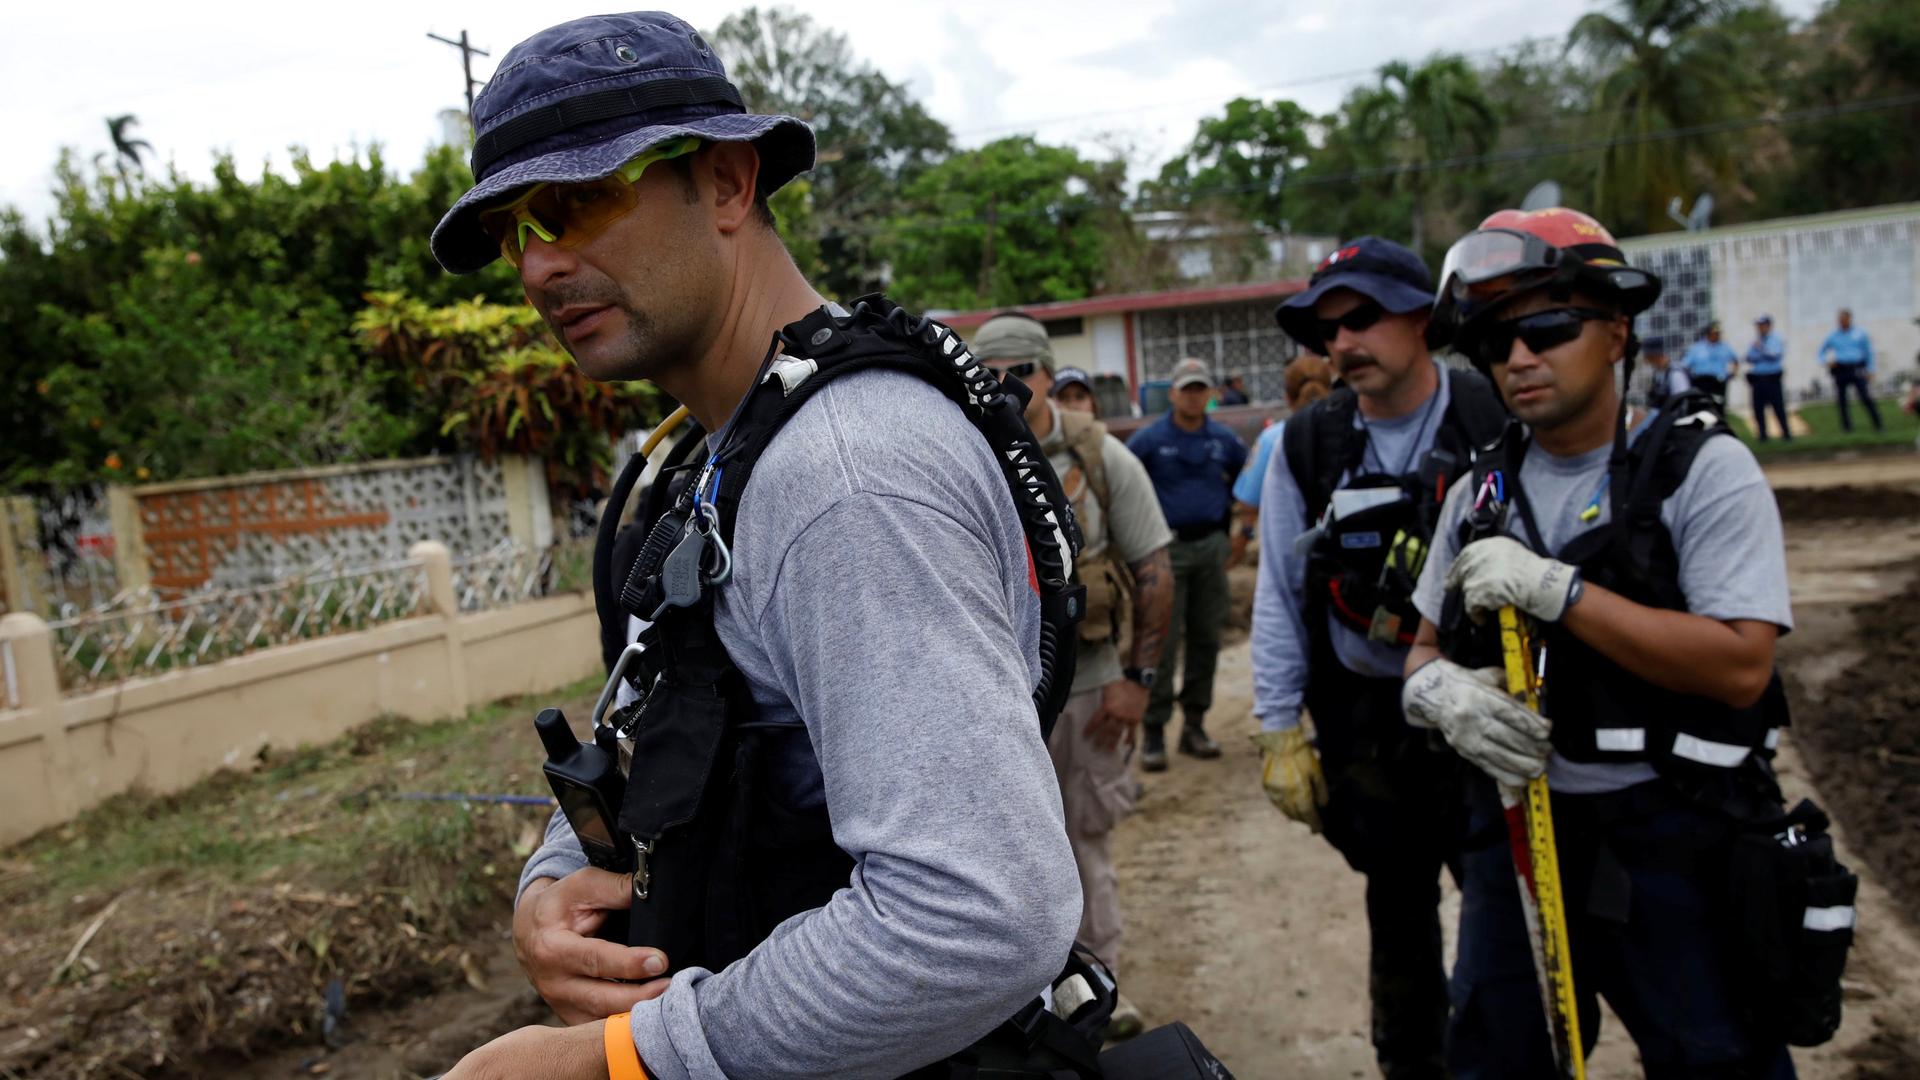 Members of the Federal Emergency Management Agency (FEMA) “Urban Search and Rescue” team conduct a search operation in an area hit by Hurricane Maria in Yauco, Puerto Rico on September 25, 2017.